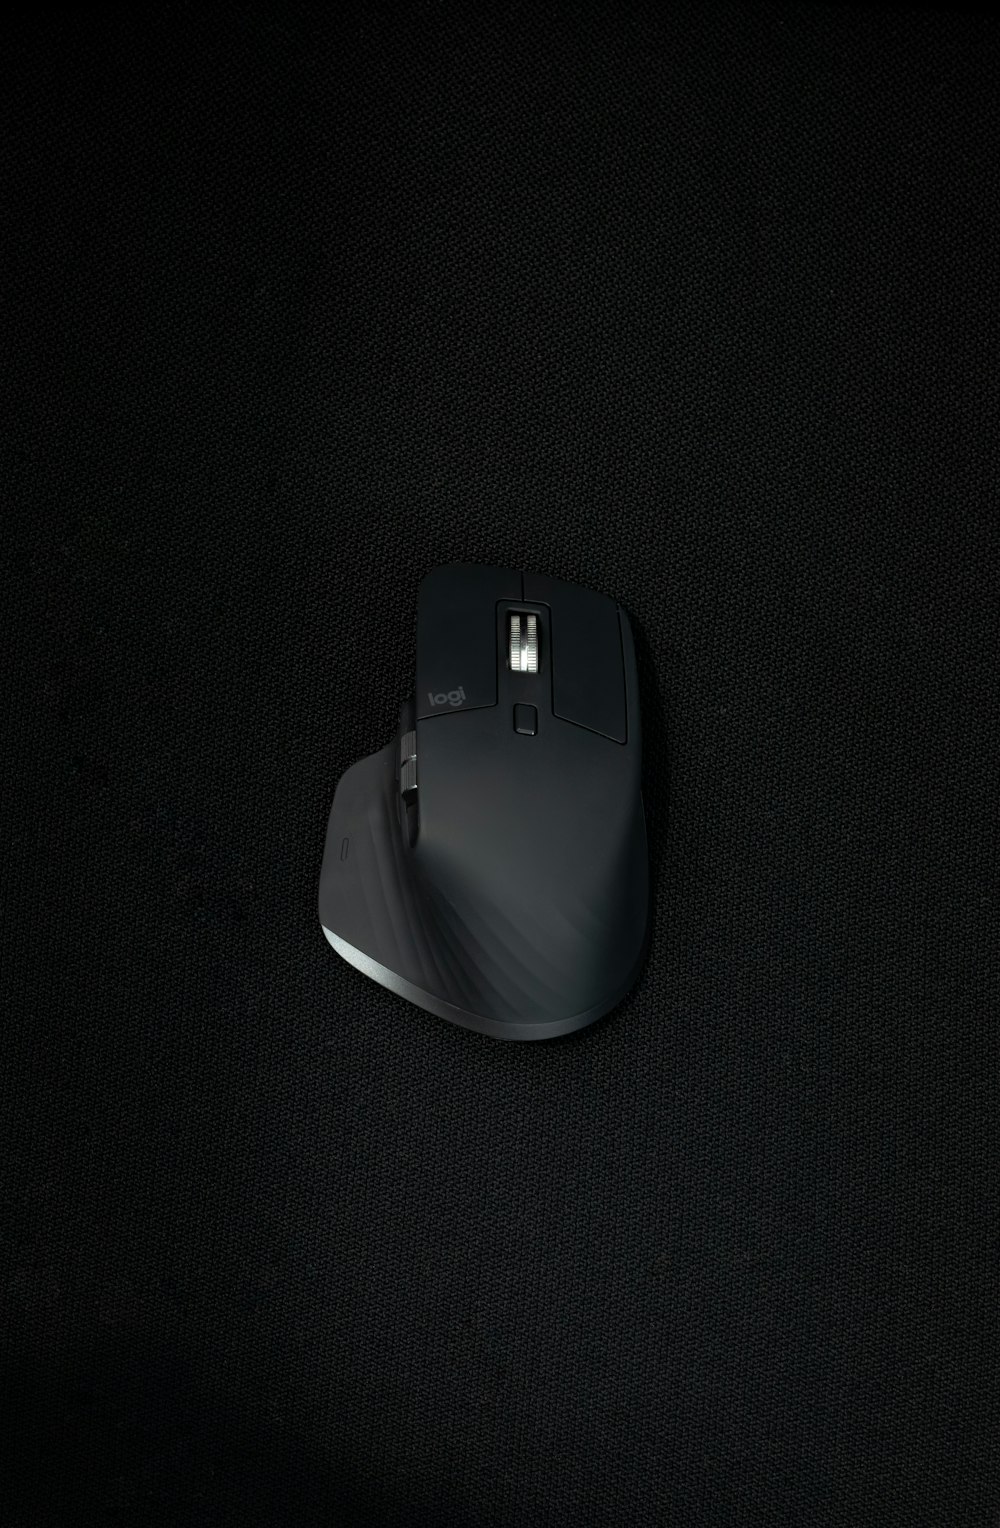 black and white cordless computer mouse